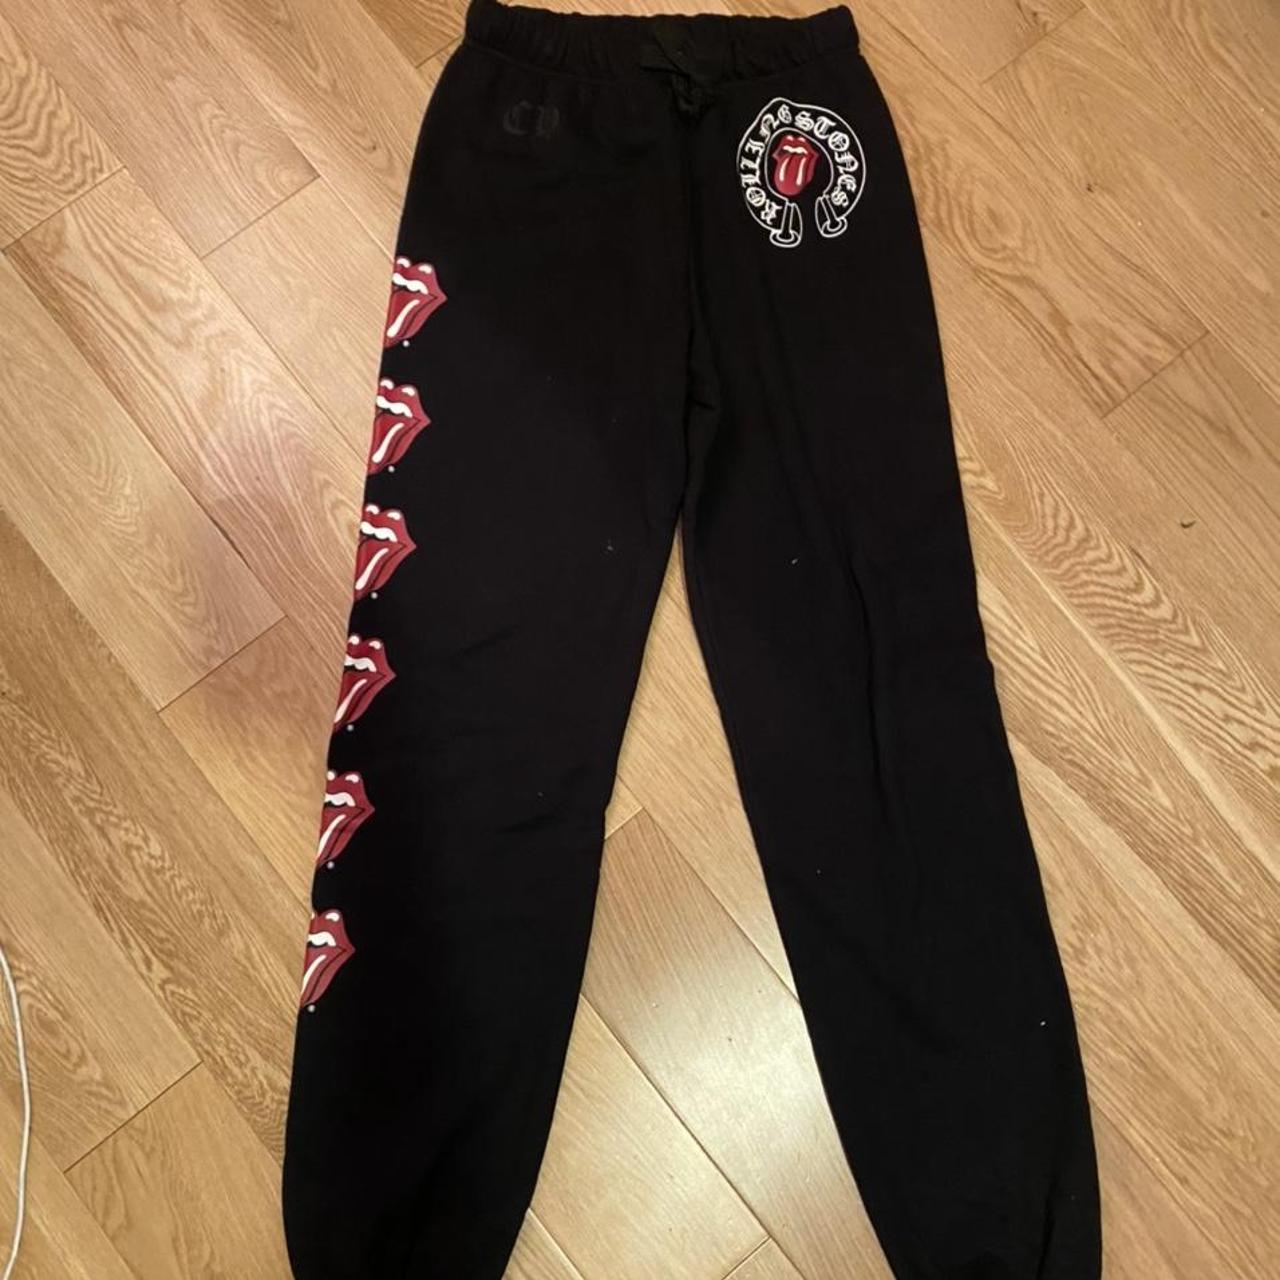 Rare Rolling Stones Chrome Hearts sweatpants with... - Depop